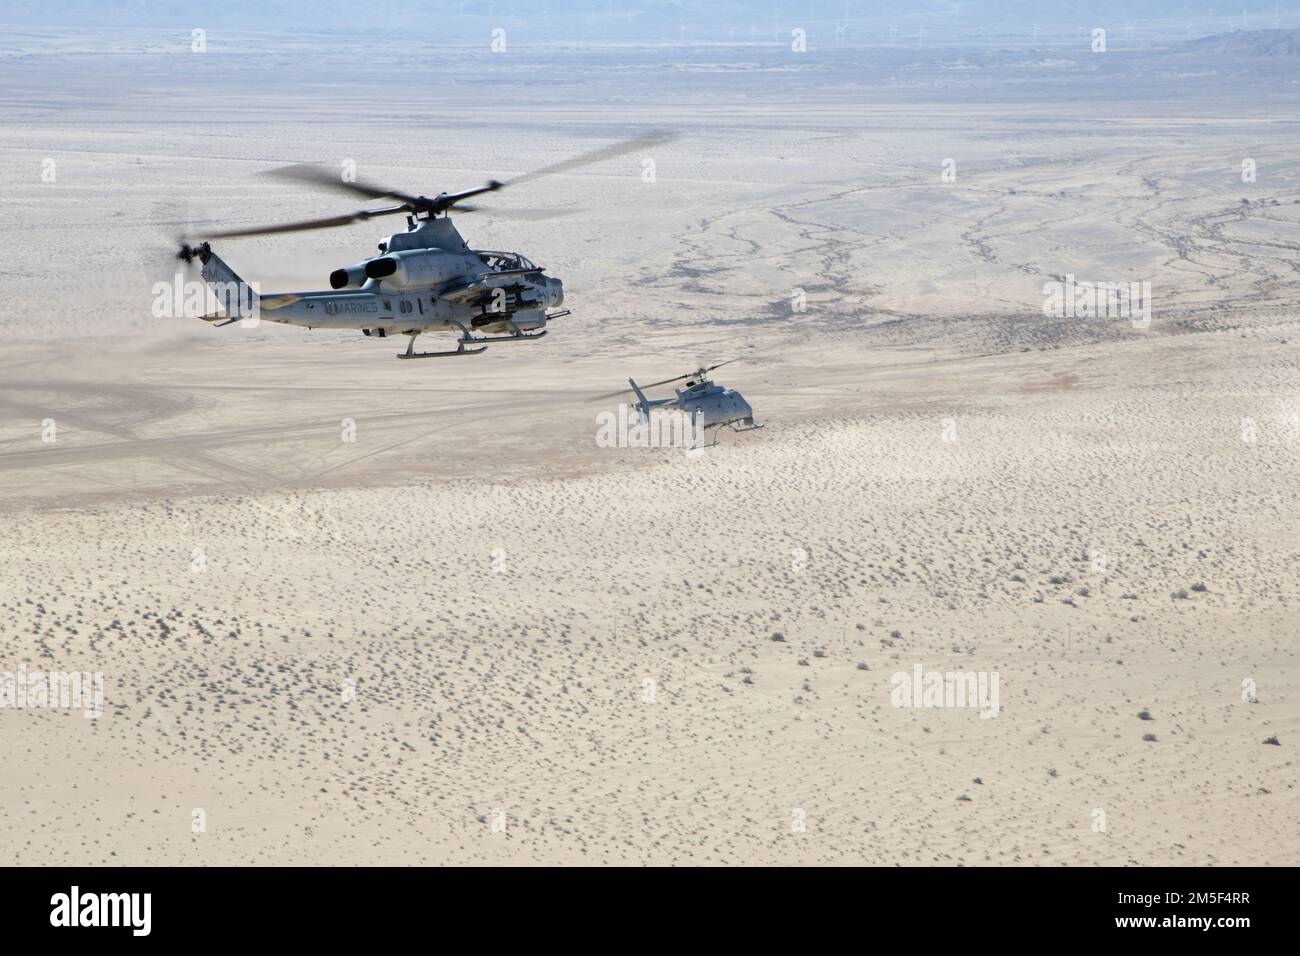 An AH-1Z Viper (left) with Marine Operational and Test Evaluation Squadron 1 (VMX-1), and an MQ-8C Fire Scout unmanned helicopter assigned to Helicopter Sea Combat Squadron 23 (HSC-23), conduct Strike Coordination and Reconnaissance Training near El Centro, California, March 10, 2022. The purpose of this exercise was to provide familiarization and concept development of manned-unmanned teaming. Stock Photo